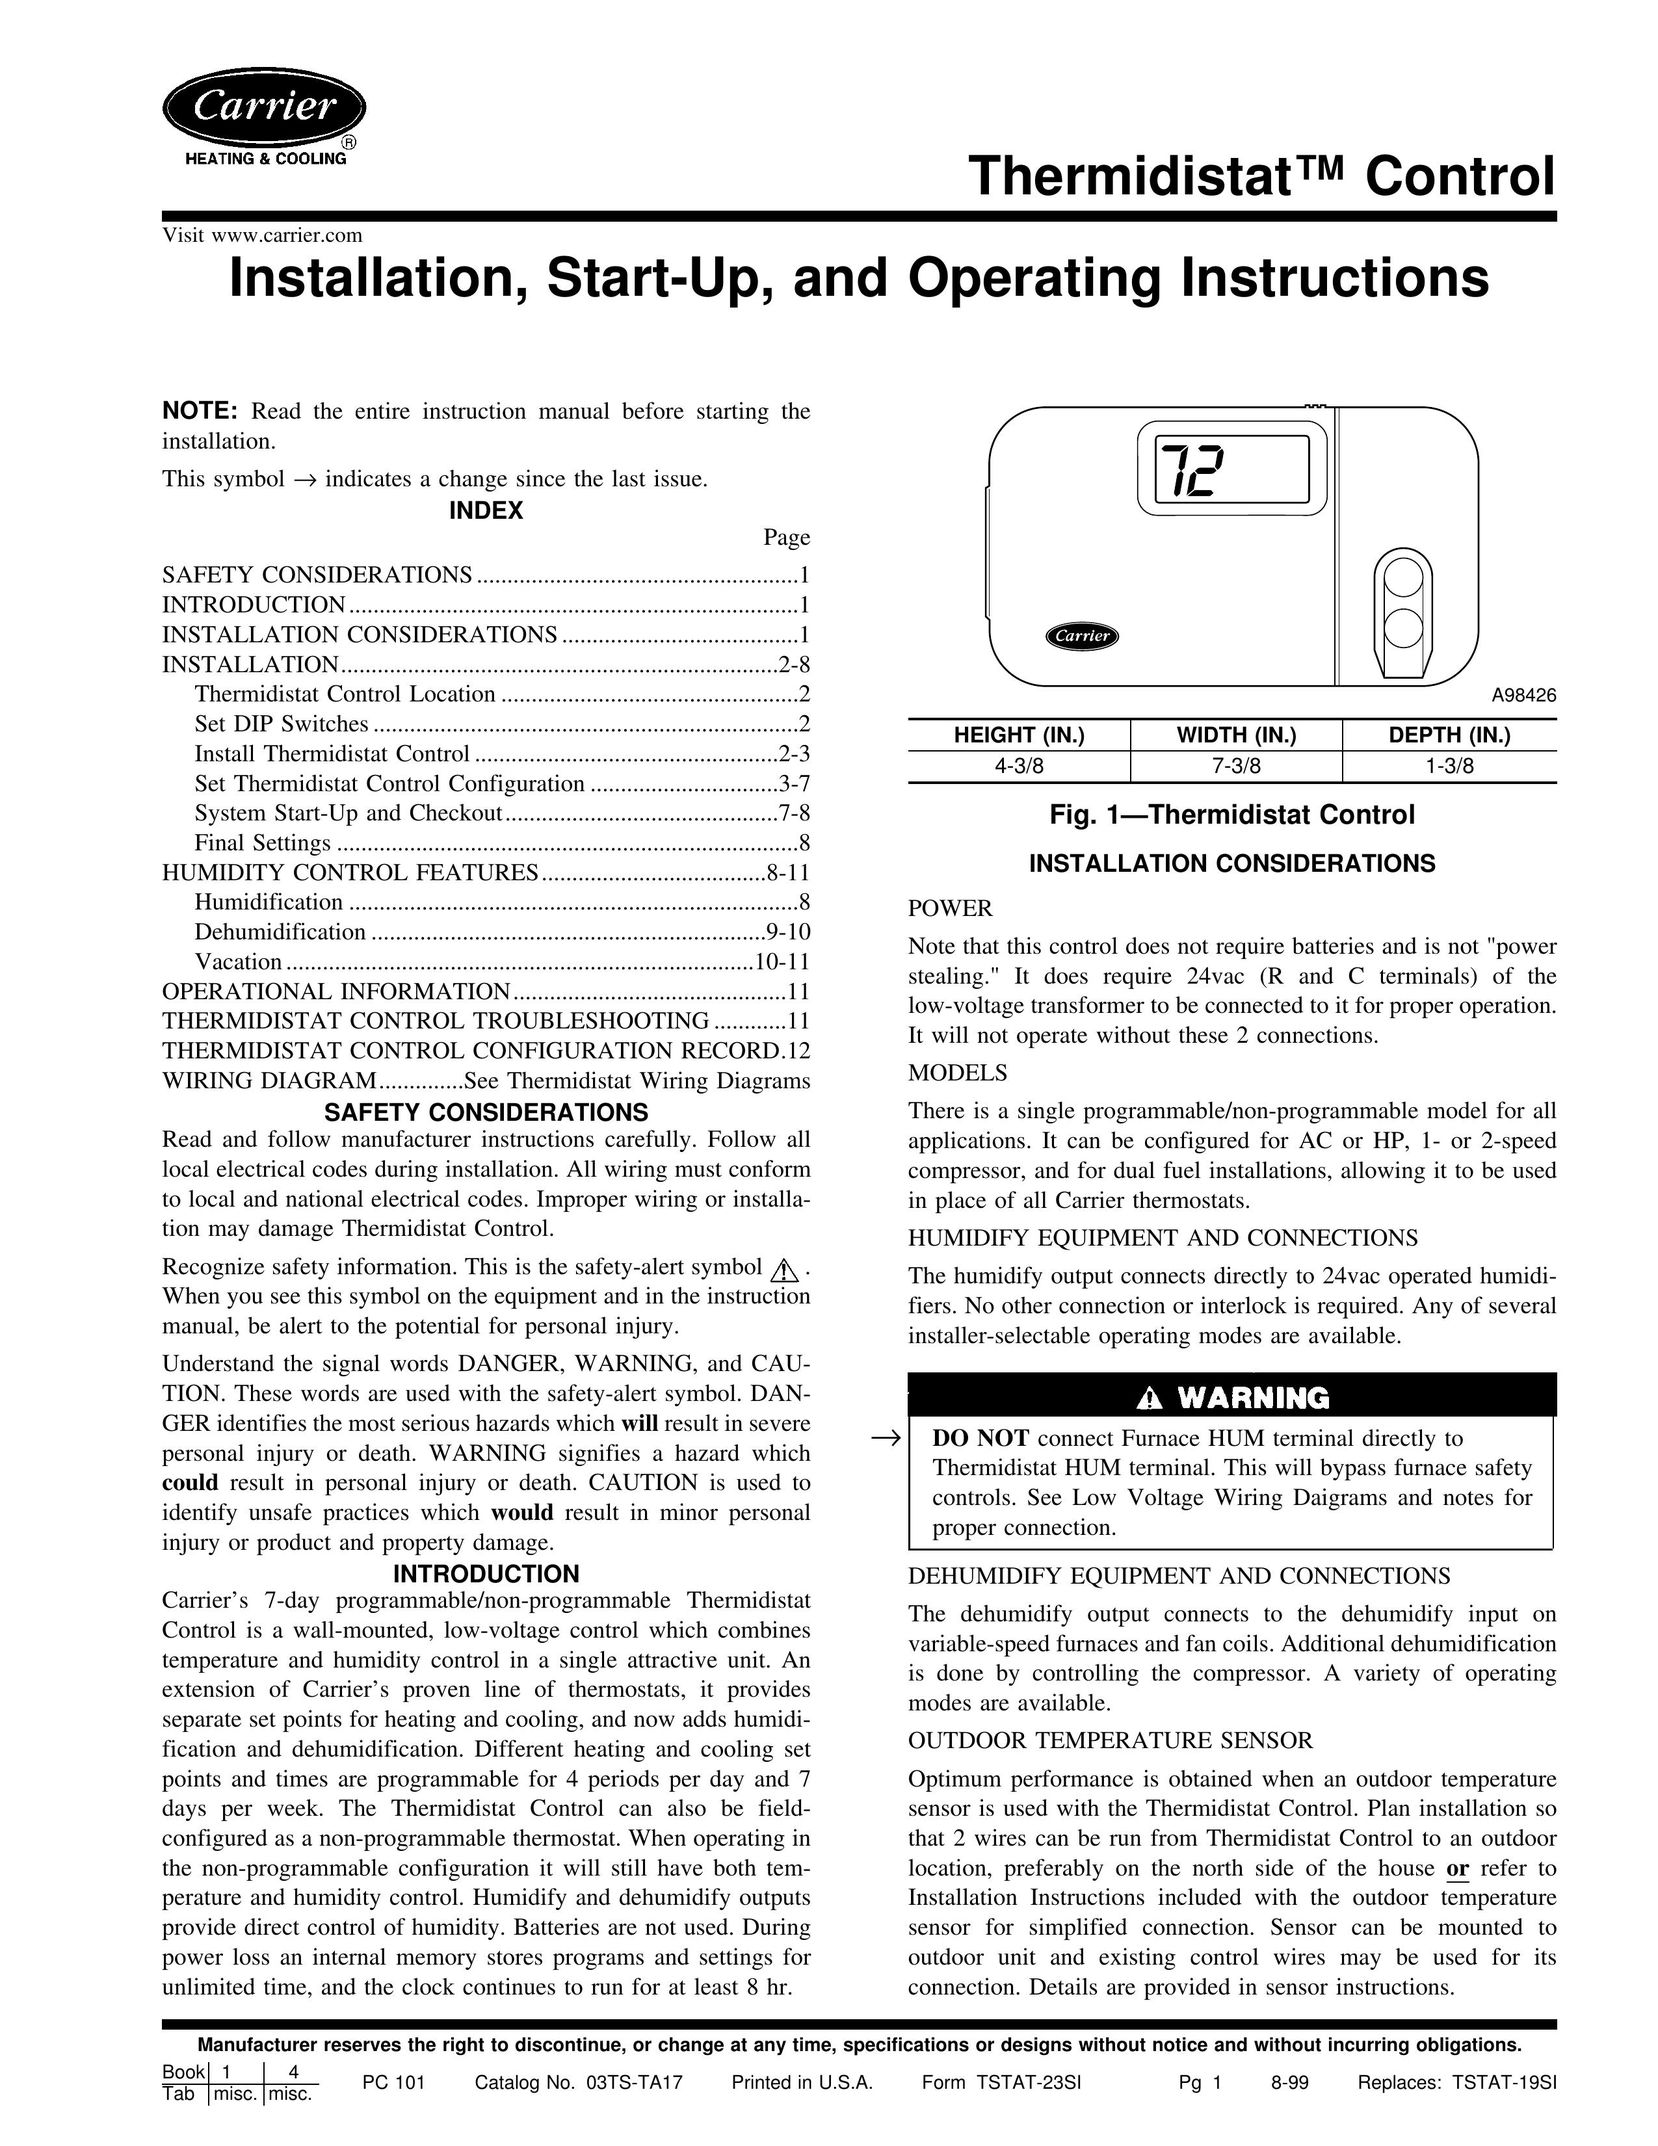 Carrier Access Thermidistat Thermostat User Manual